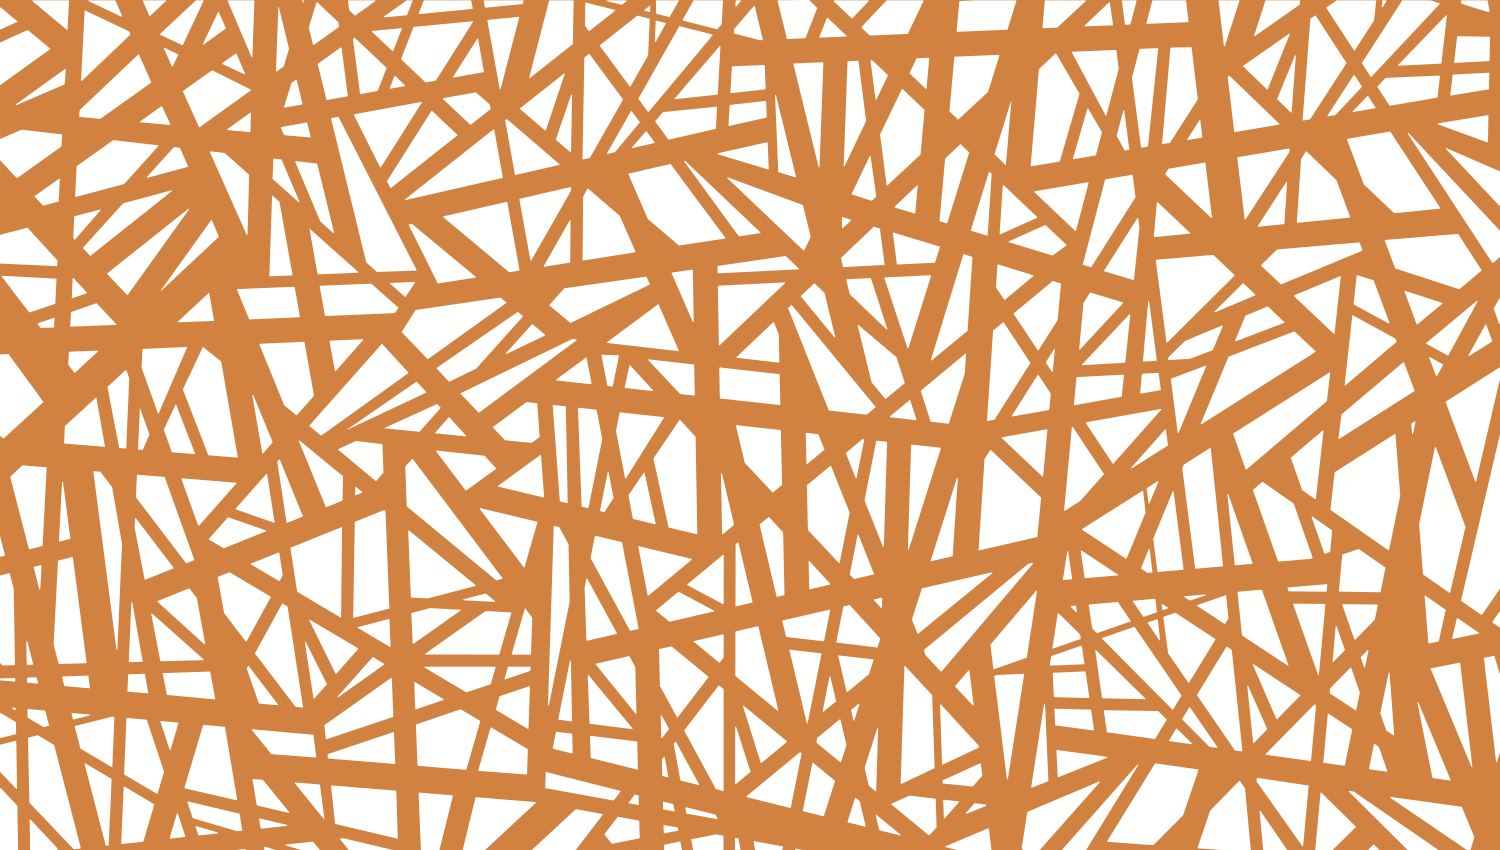 Parasoleil™ Shattered© pattern displayed with a ochre color overlay